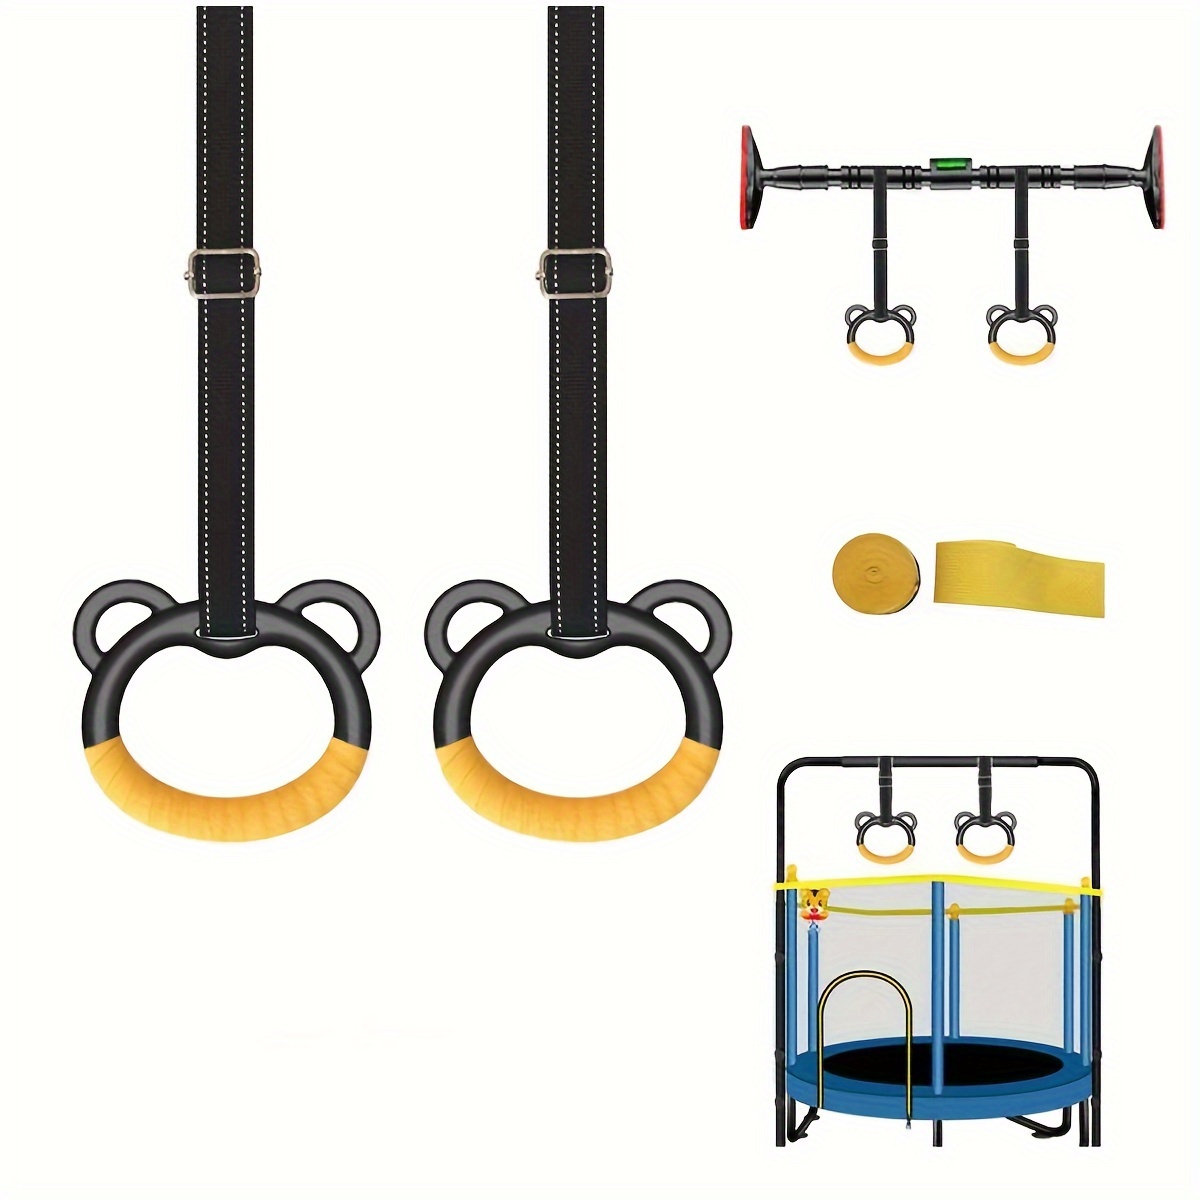 

1 Pair Home Pull-up Rings, Pull Up Rings For Exercise Strength Training, Sports Game Equipment - Pole Not Included